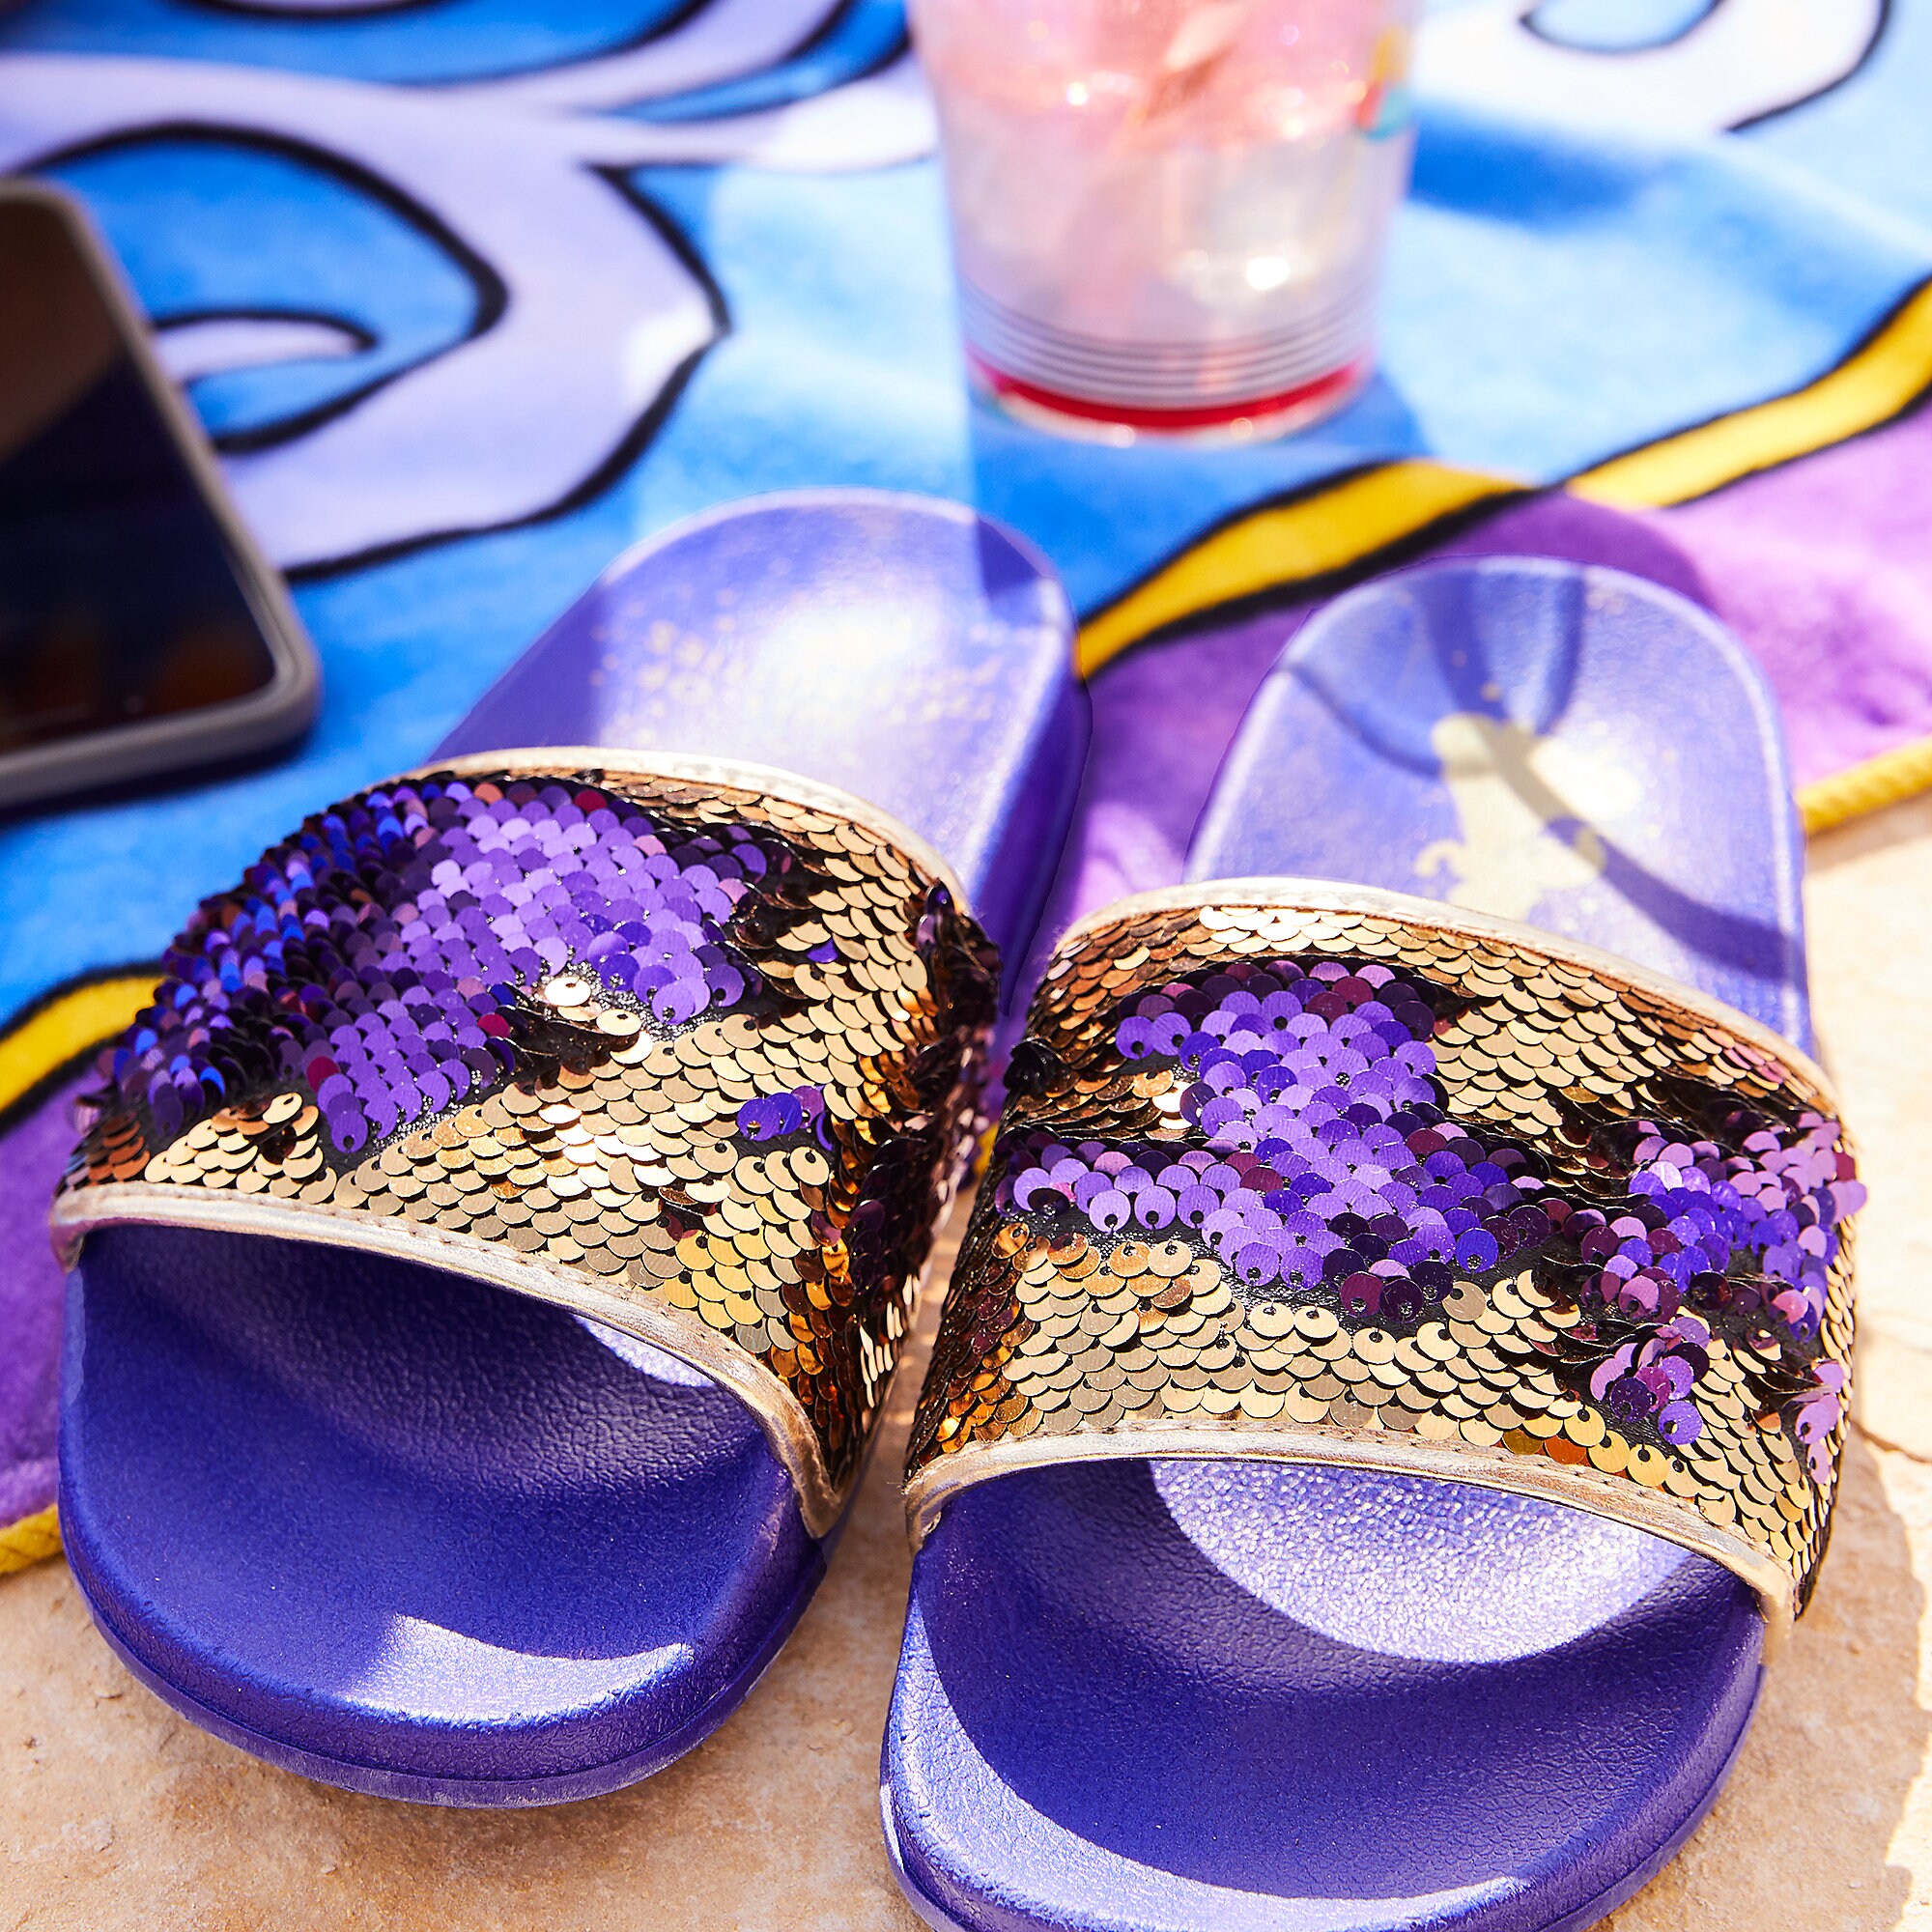 Jasmine Slides for Adults - Oh My Disney